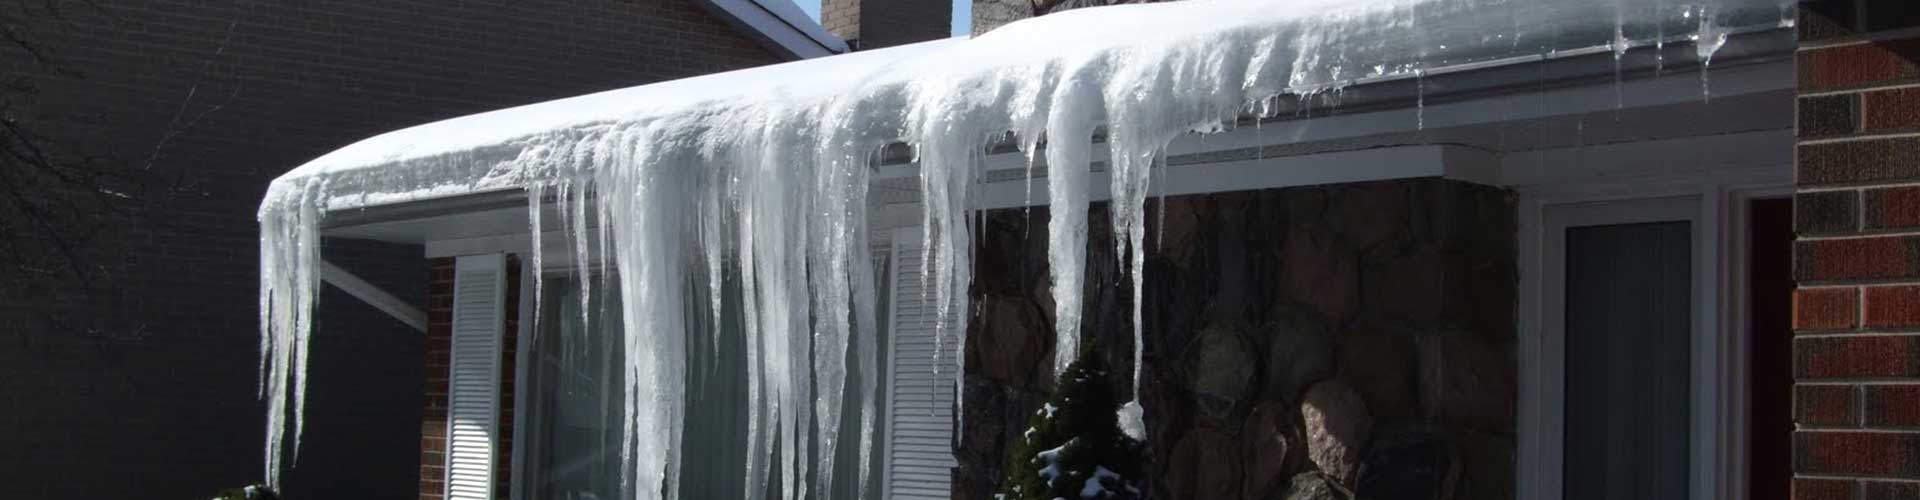 Ice damming on gutters and roof